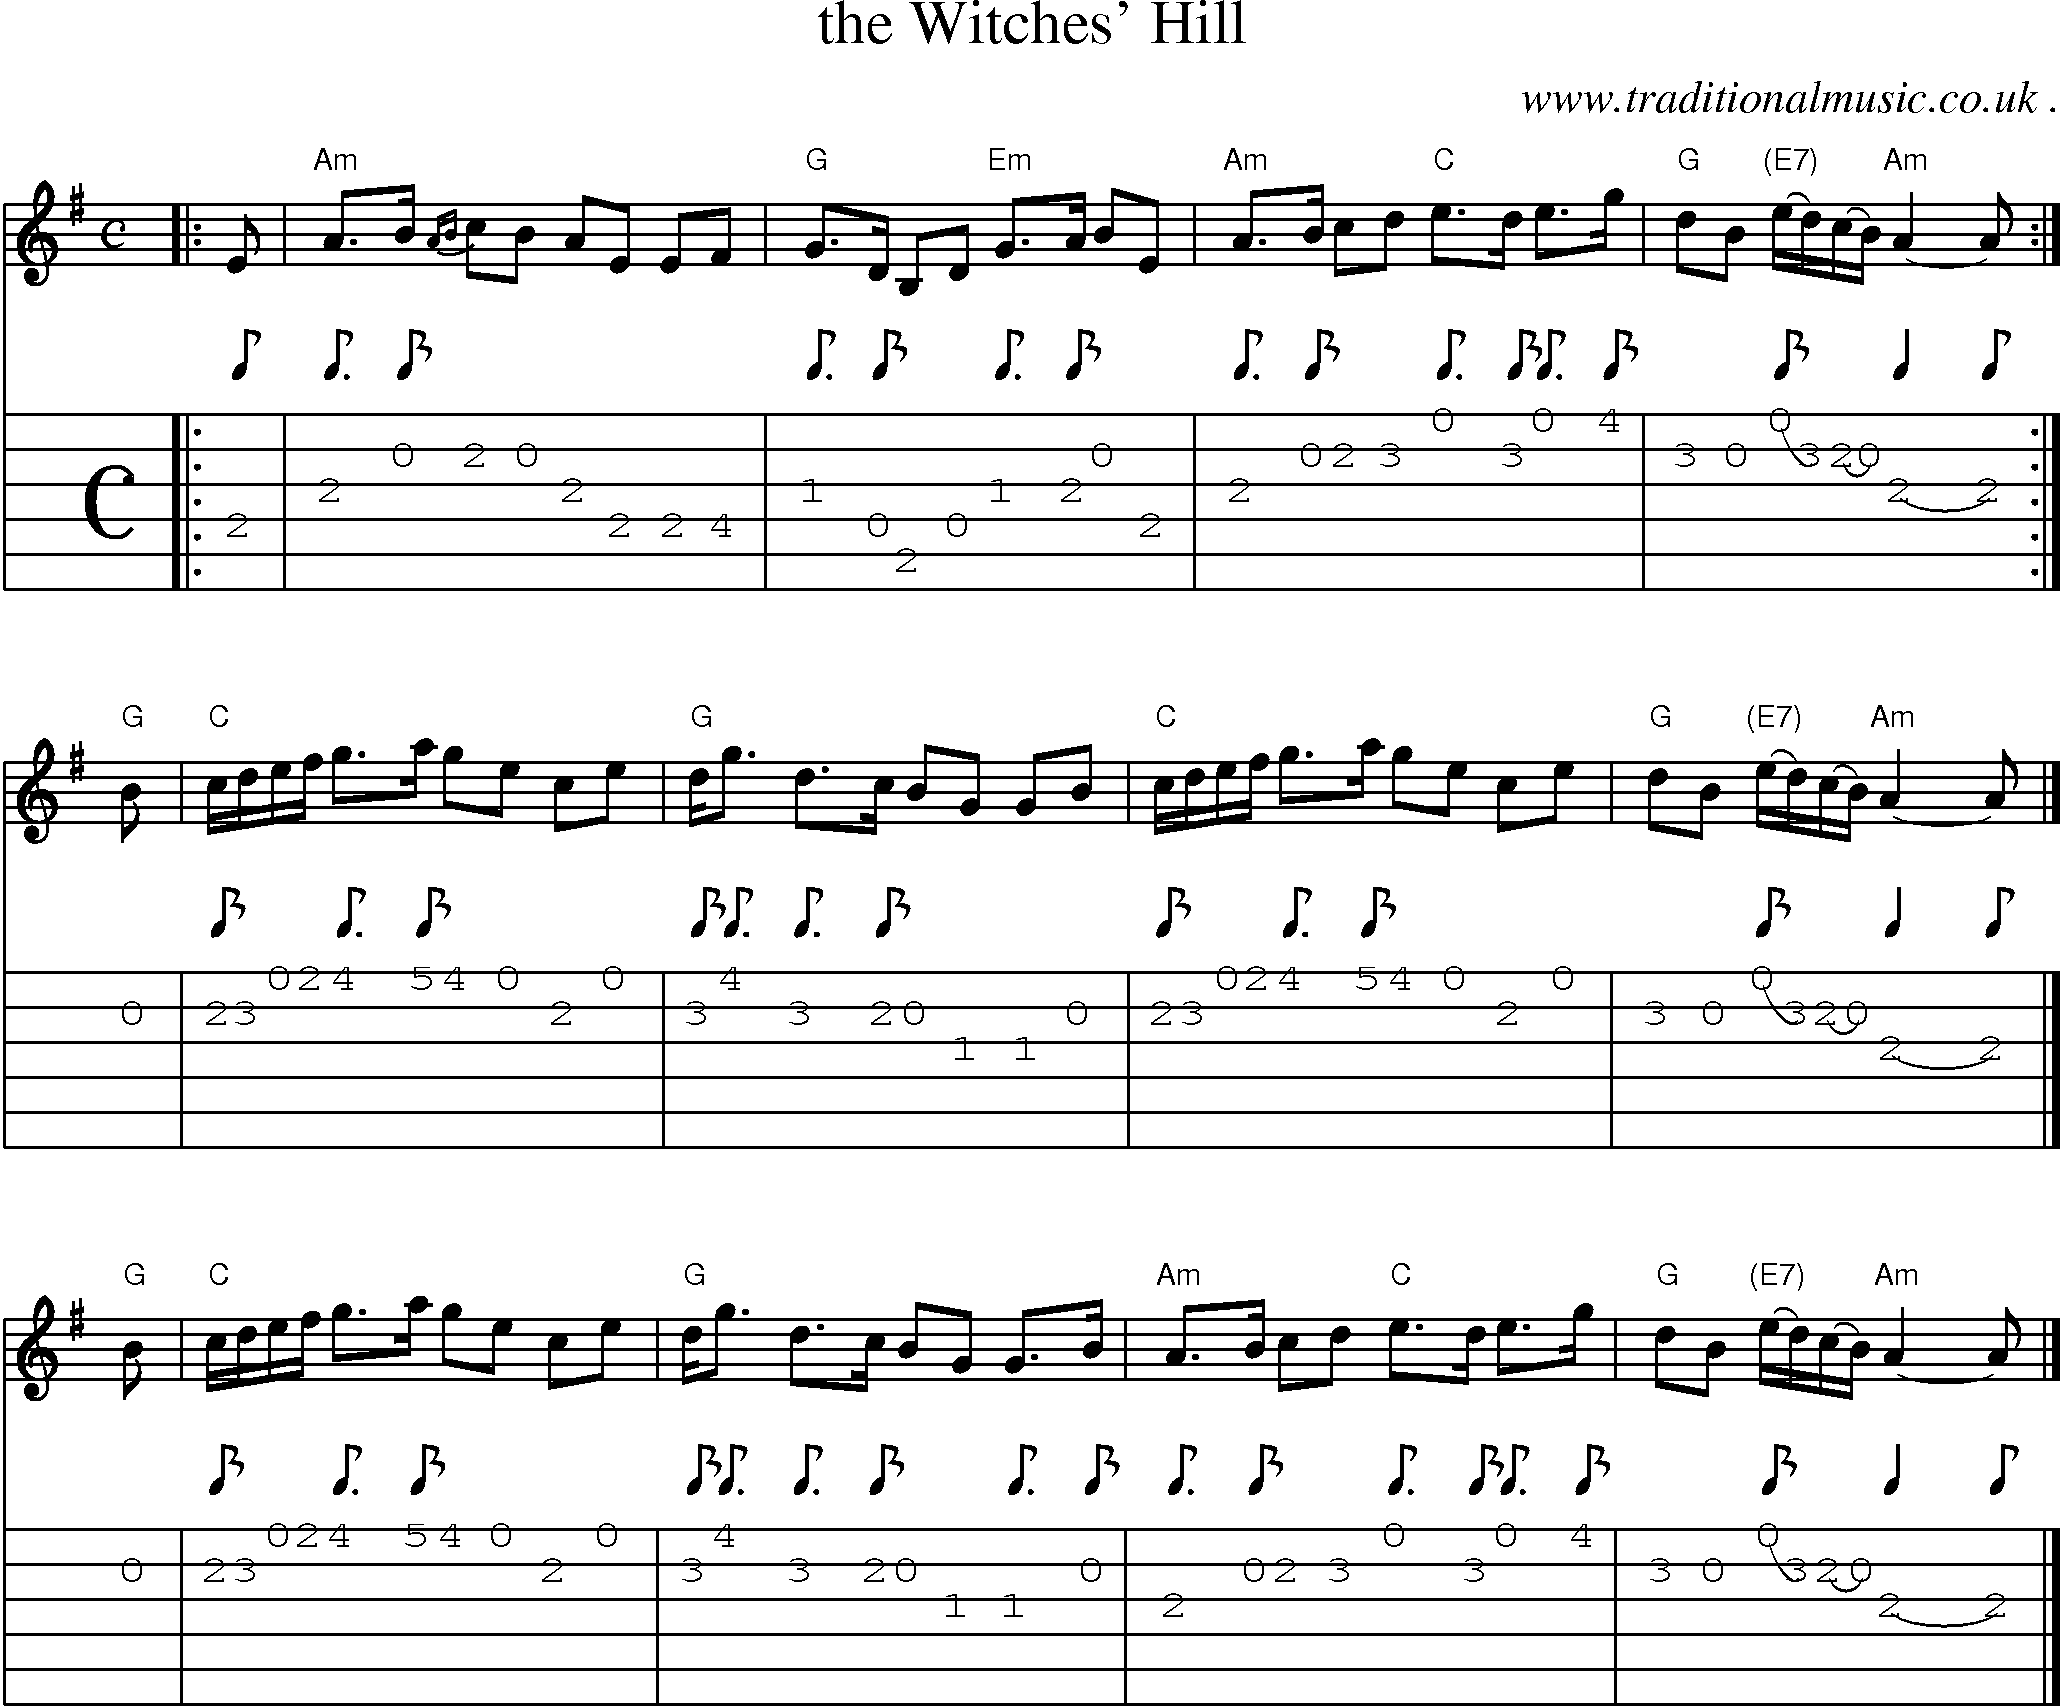 Sheet-music  score, Chords and Guitar Tabs for The Witches Hill